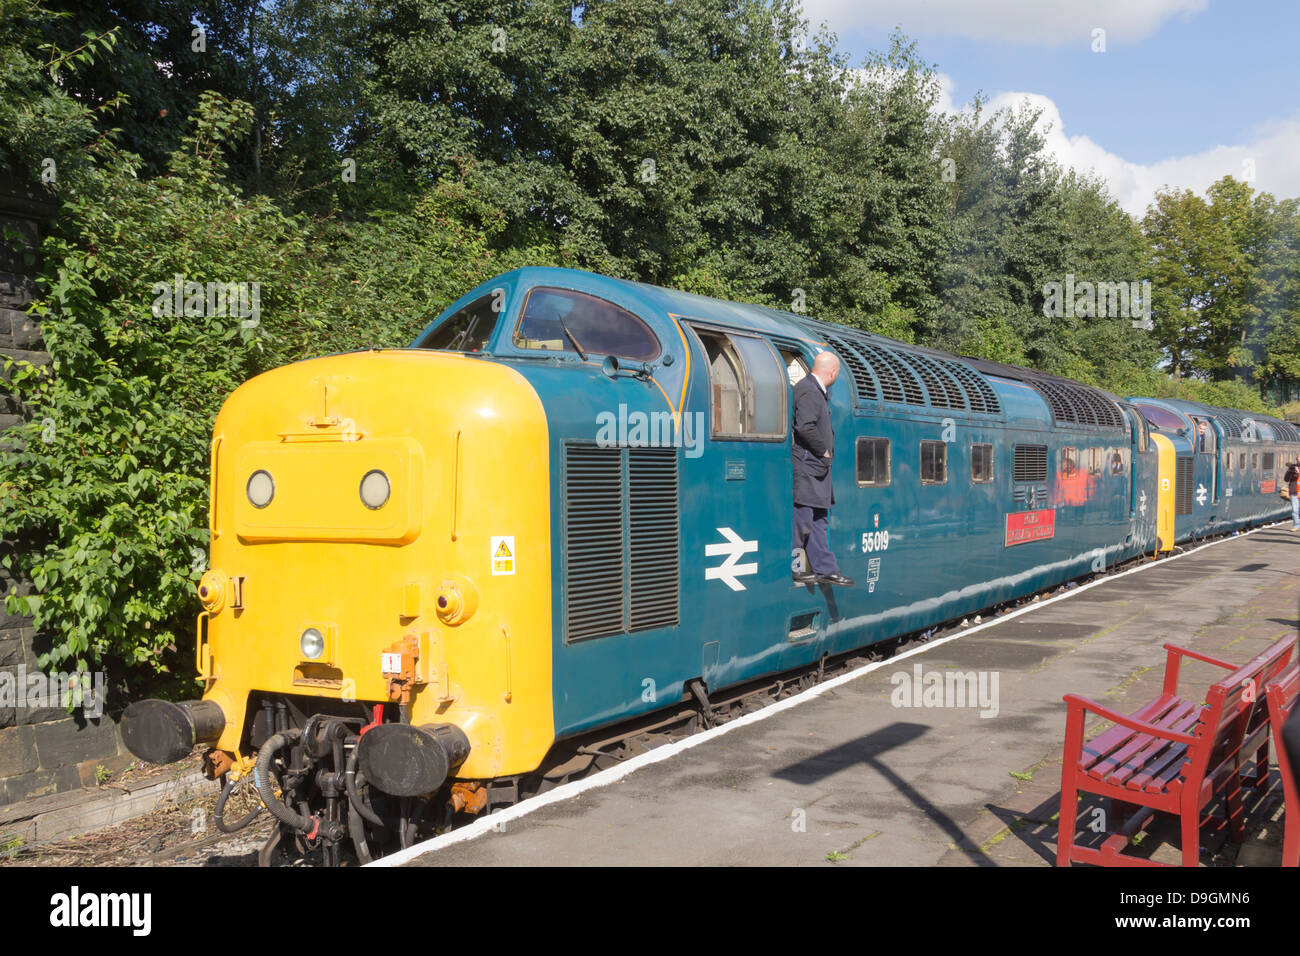 Two English Electric Type 5, class 55 'Deltic' diesel-electric railway engines on the East Lancashire Railway heritage line. Stock Photo